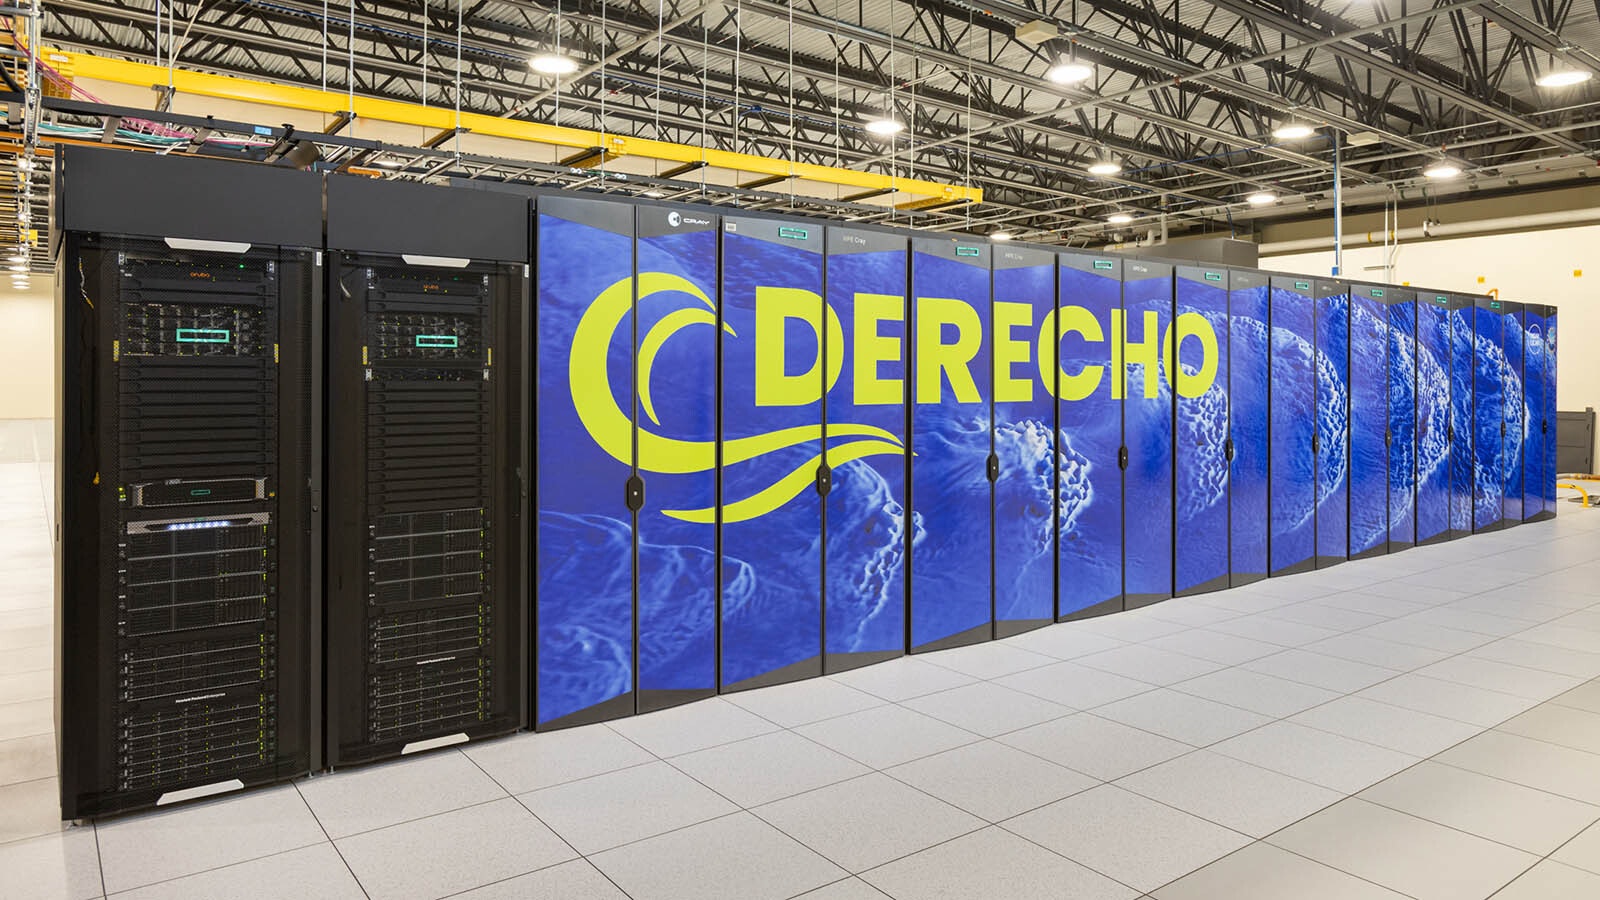 The Derecho supercompluter was installed at the Wyoming-NCAR Supercomputing Center in Cheyenne in 2023. It features 2,488 compute notes with 128 AMD Milan cores for each node, along with 82 nodes with four NVIDIA A100 GPUs each. It boasts a speed of 19.87 petaflops.